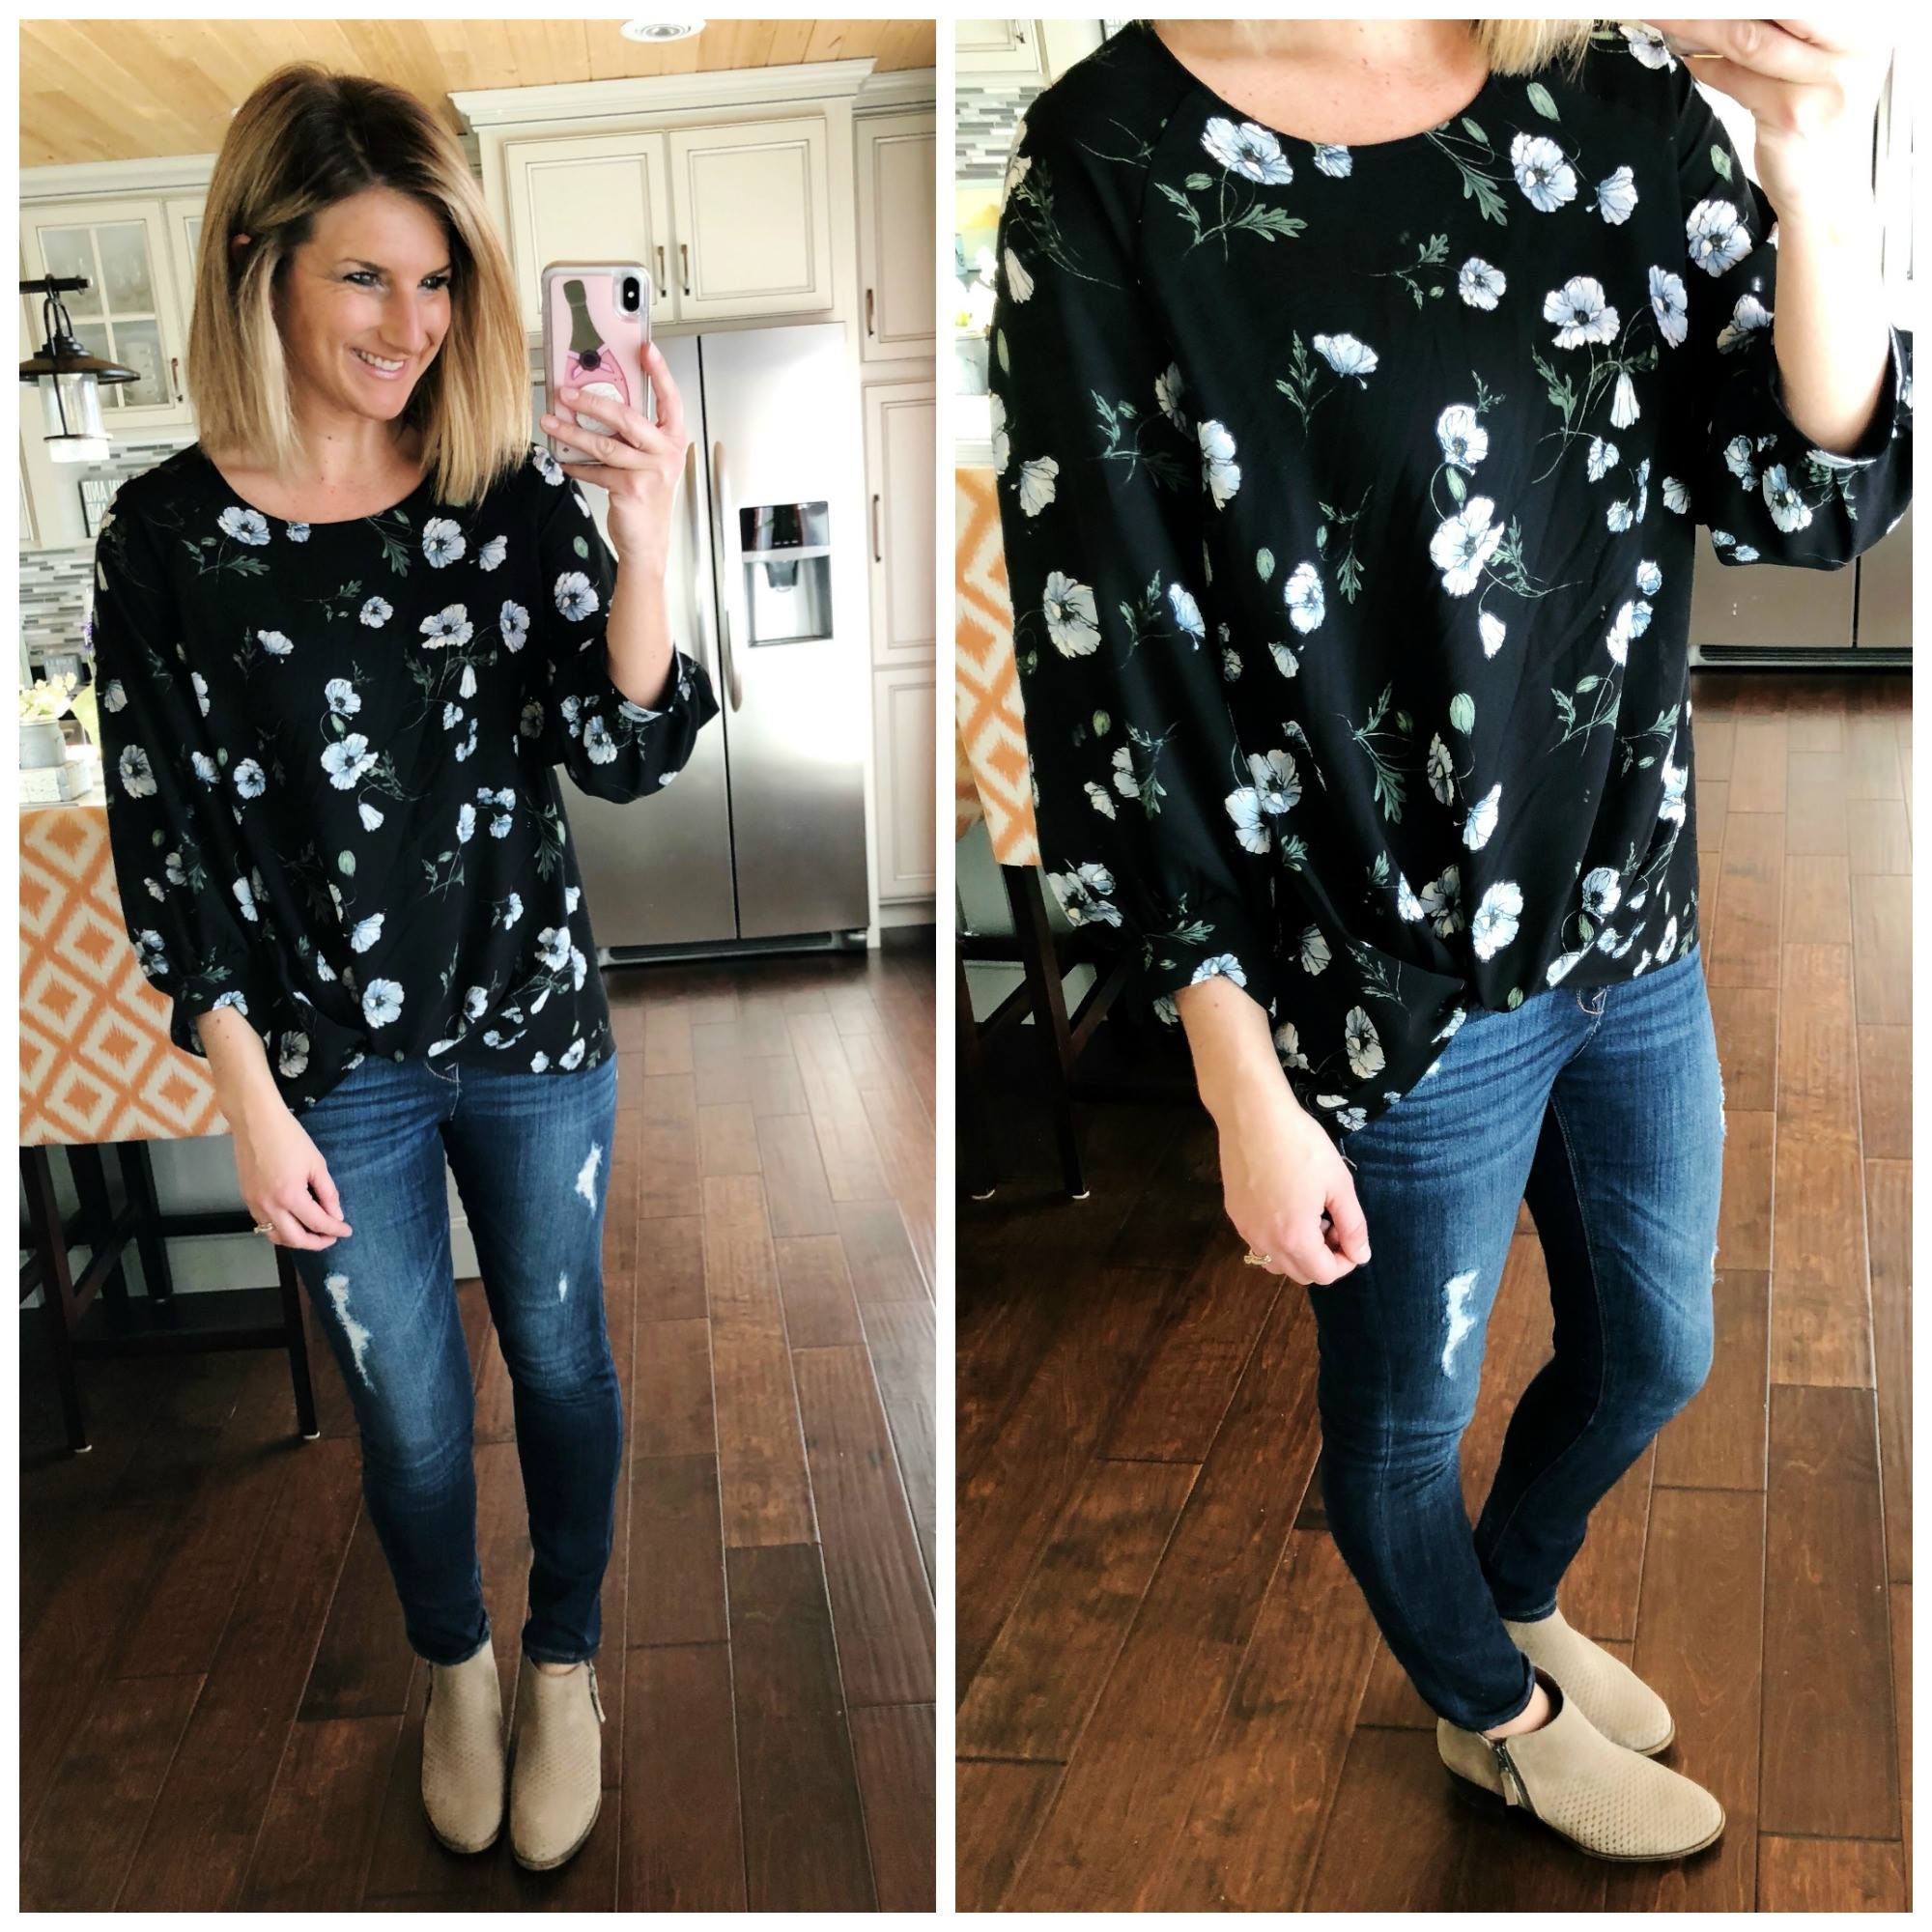 How to Style a Twist Hem Top // Spring Fashion // Floral Twist Hem Top + Distressed Jeggings + Tan Booties